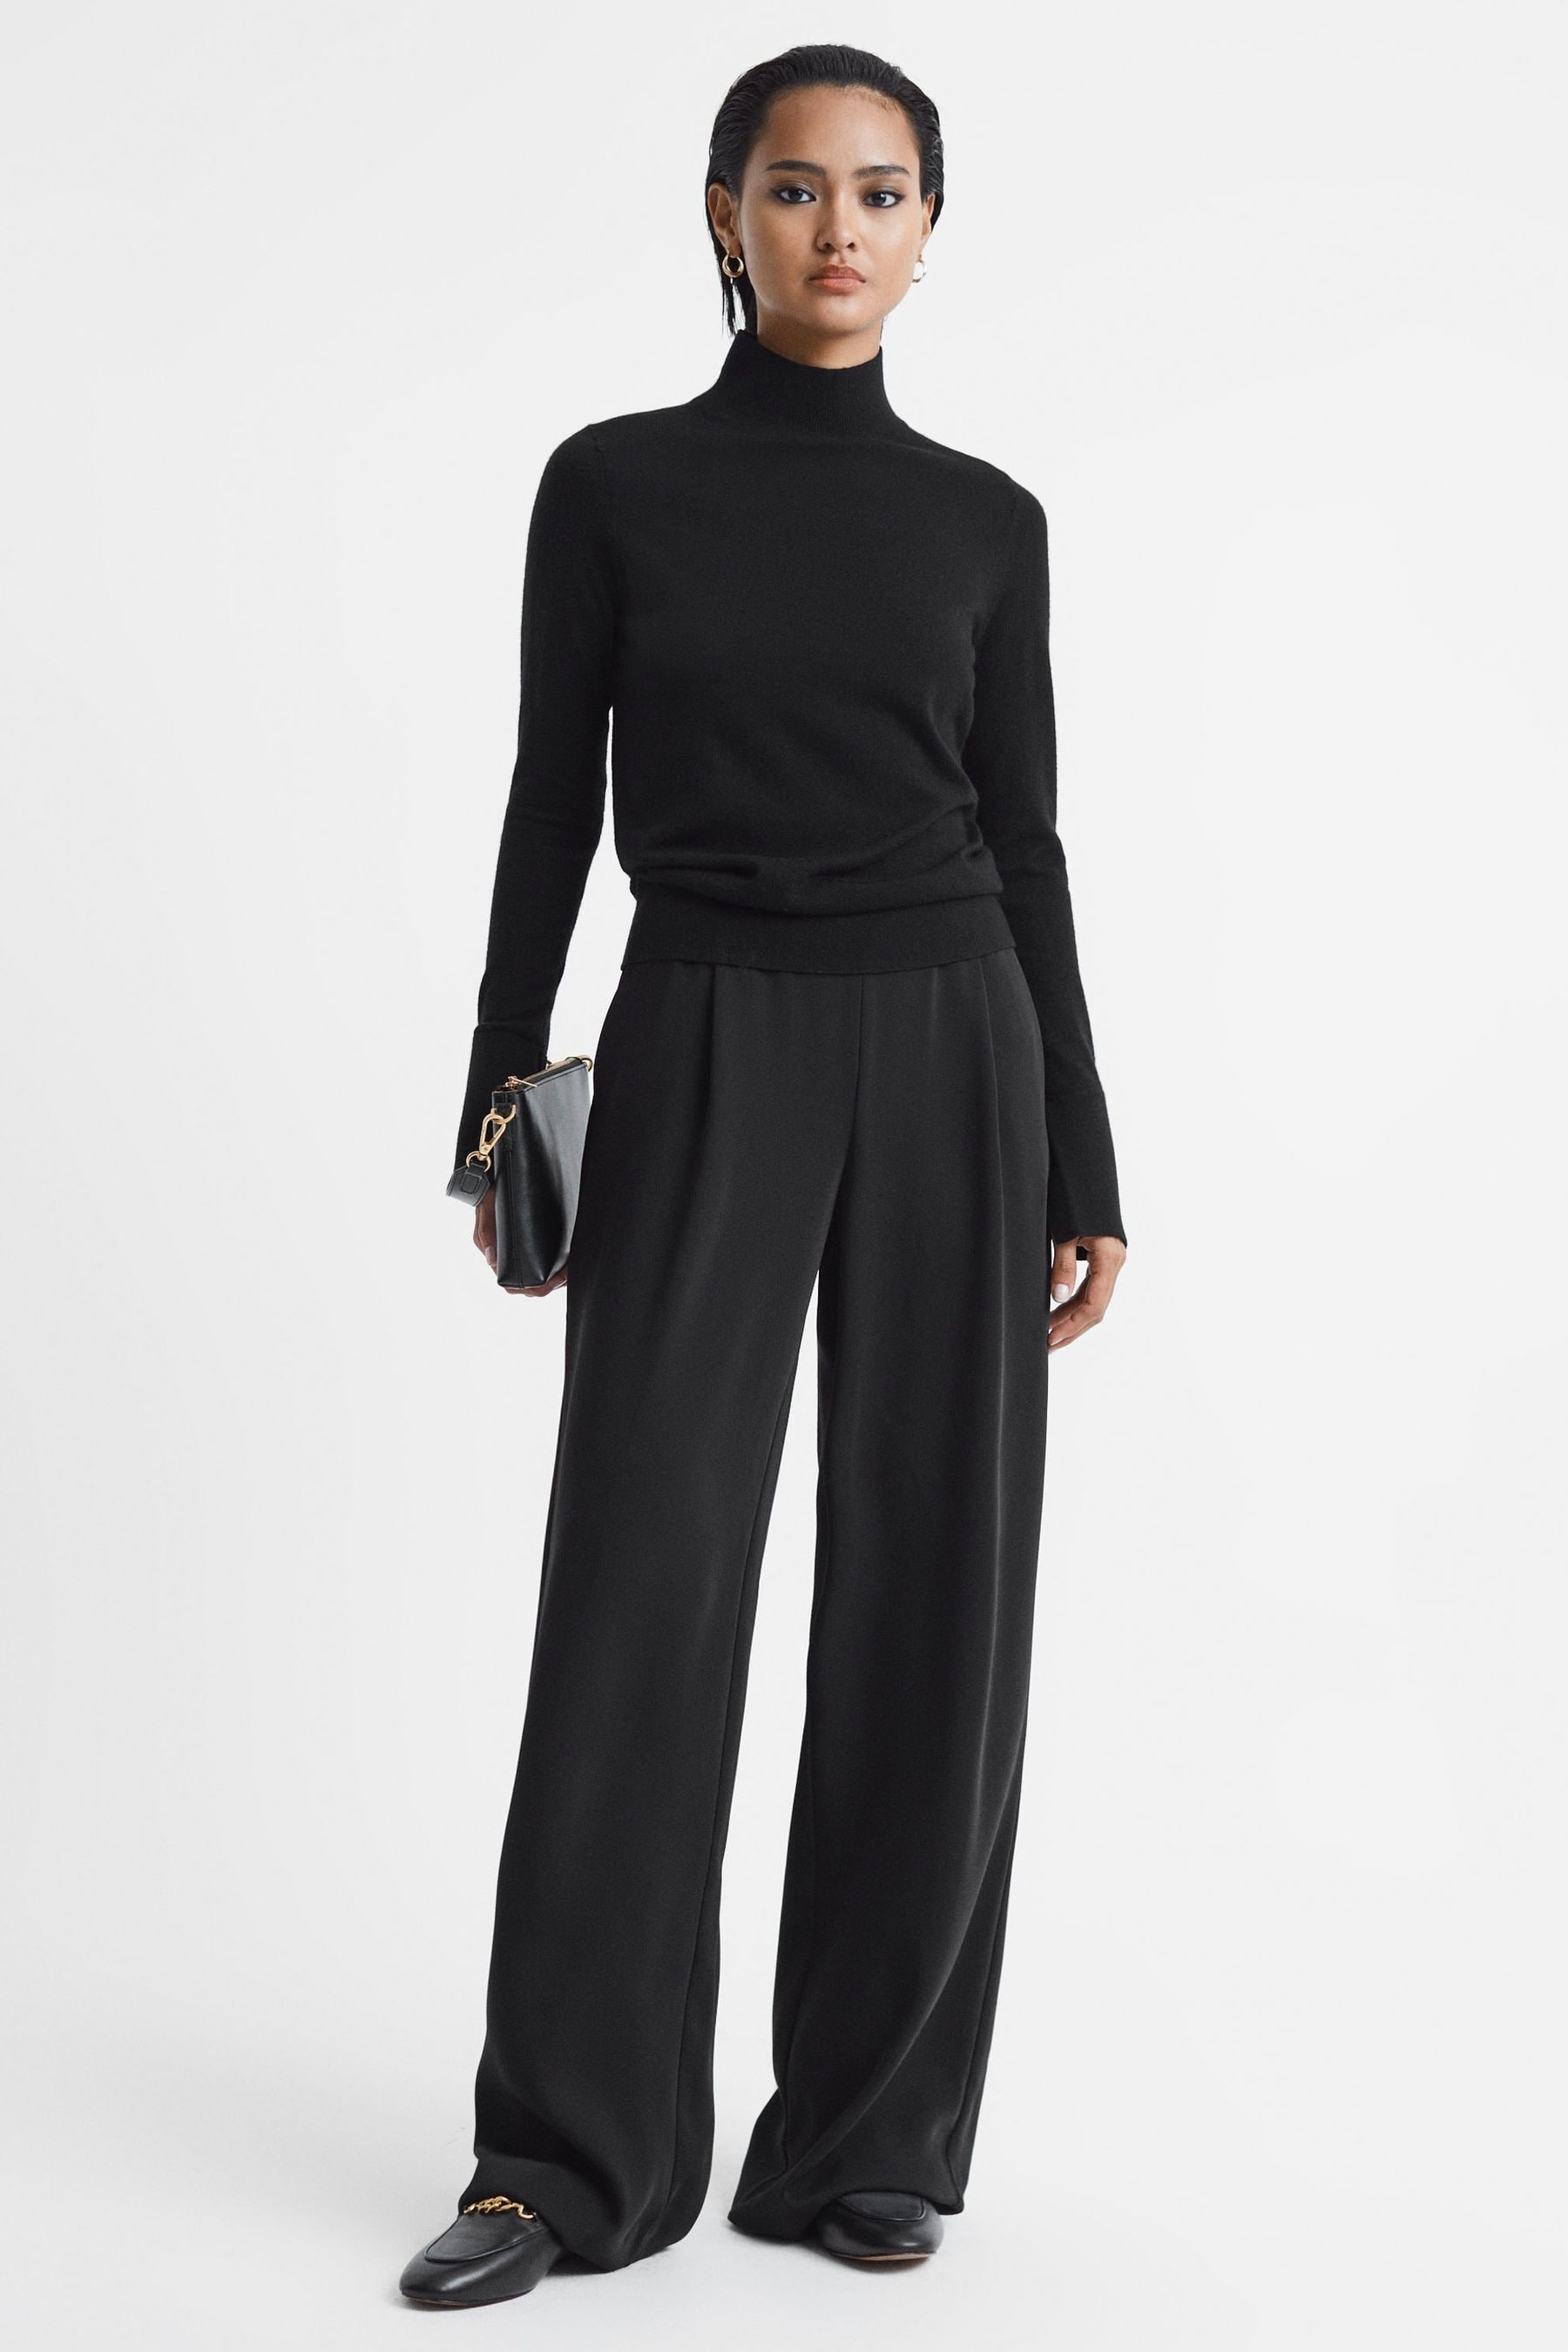 Buy Reiss Black Kylie Merino Wool Fitted Funnel Neck Top from the Next ...